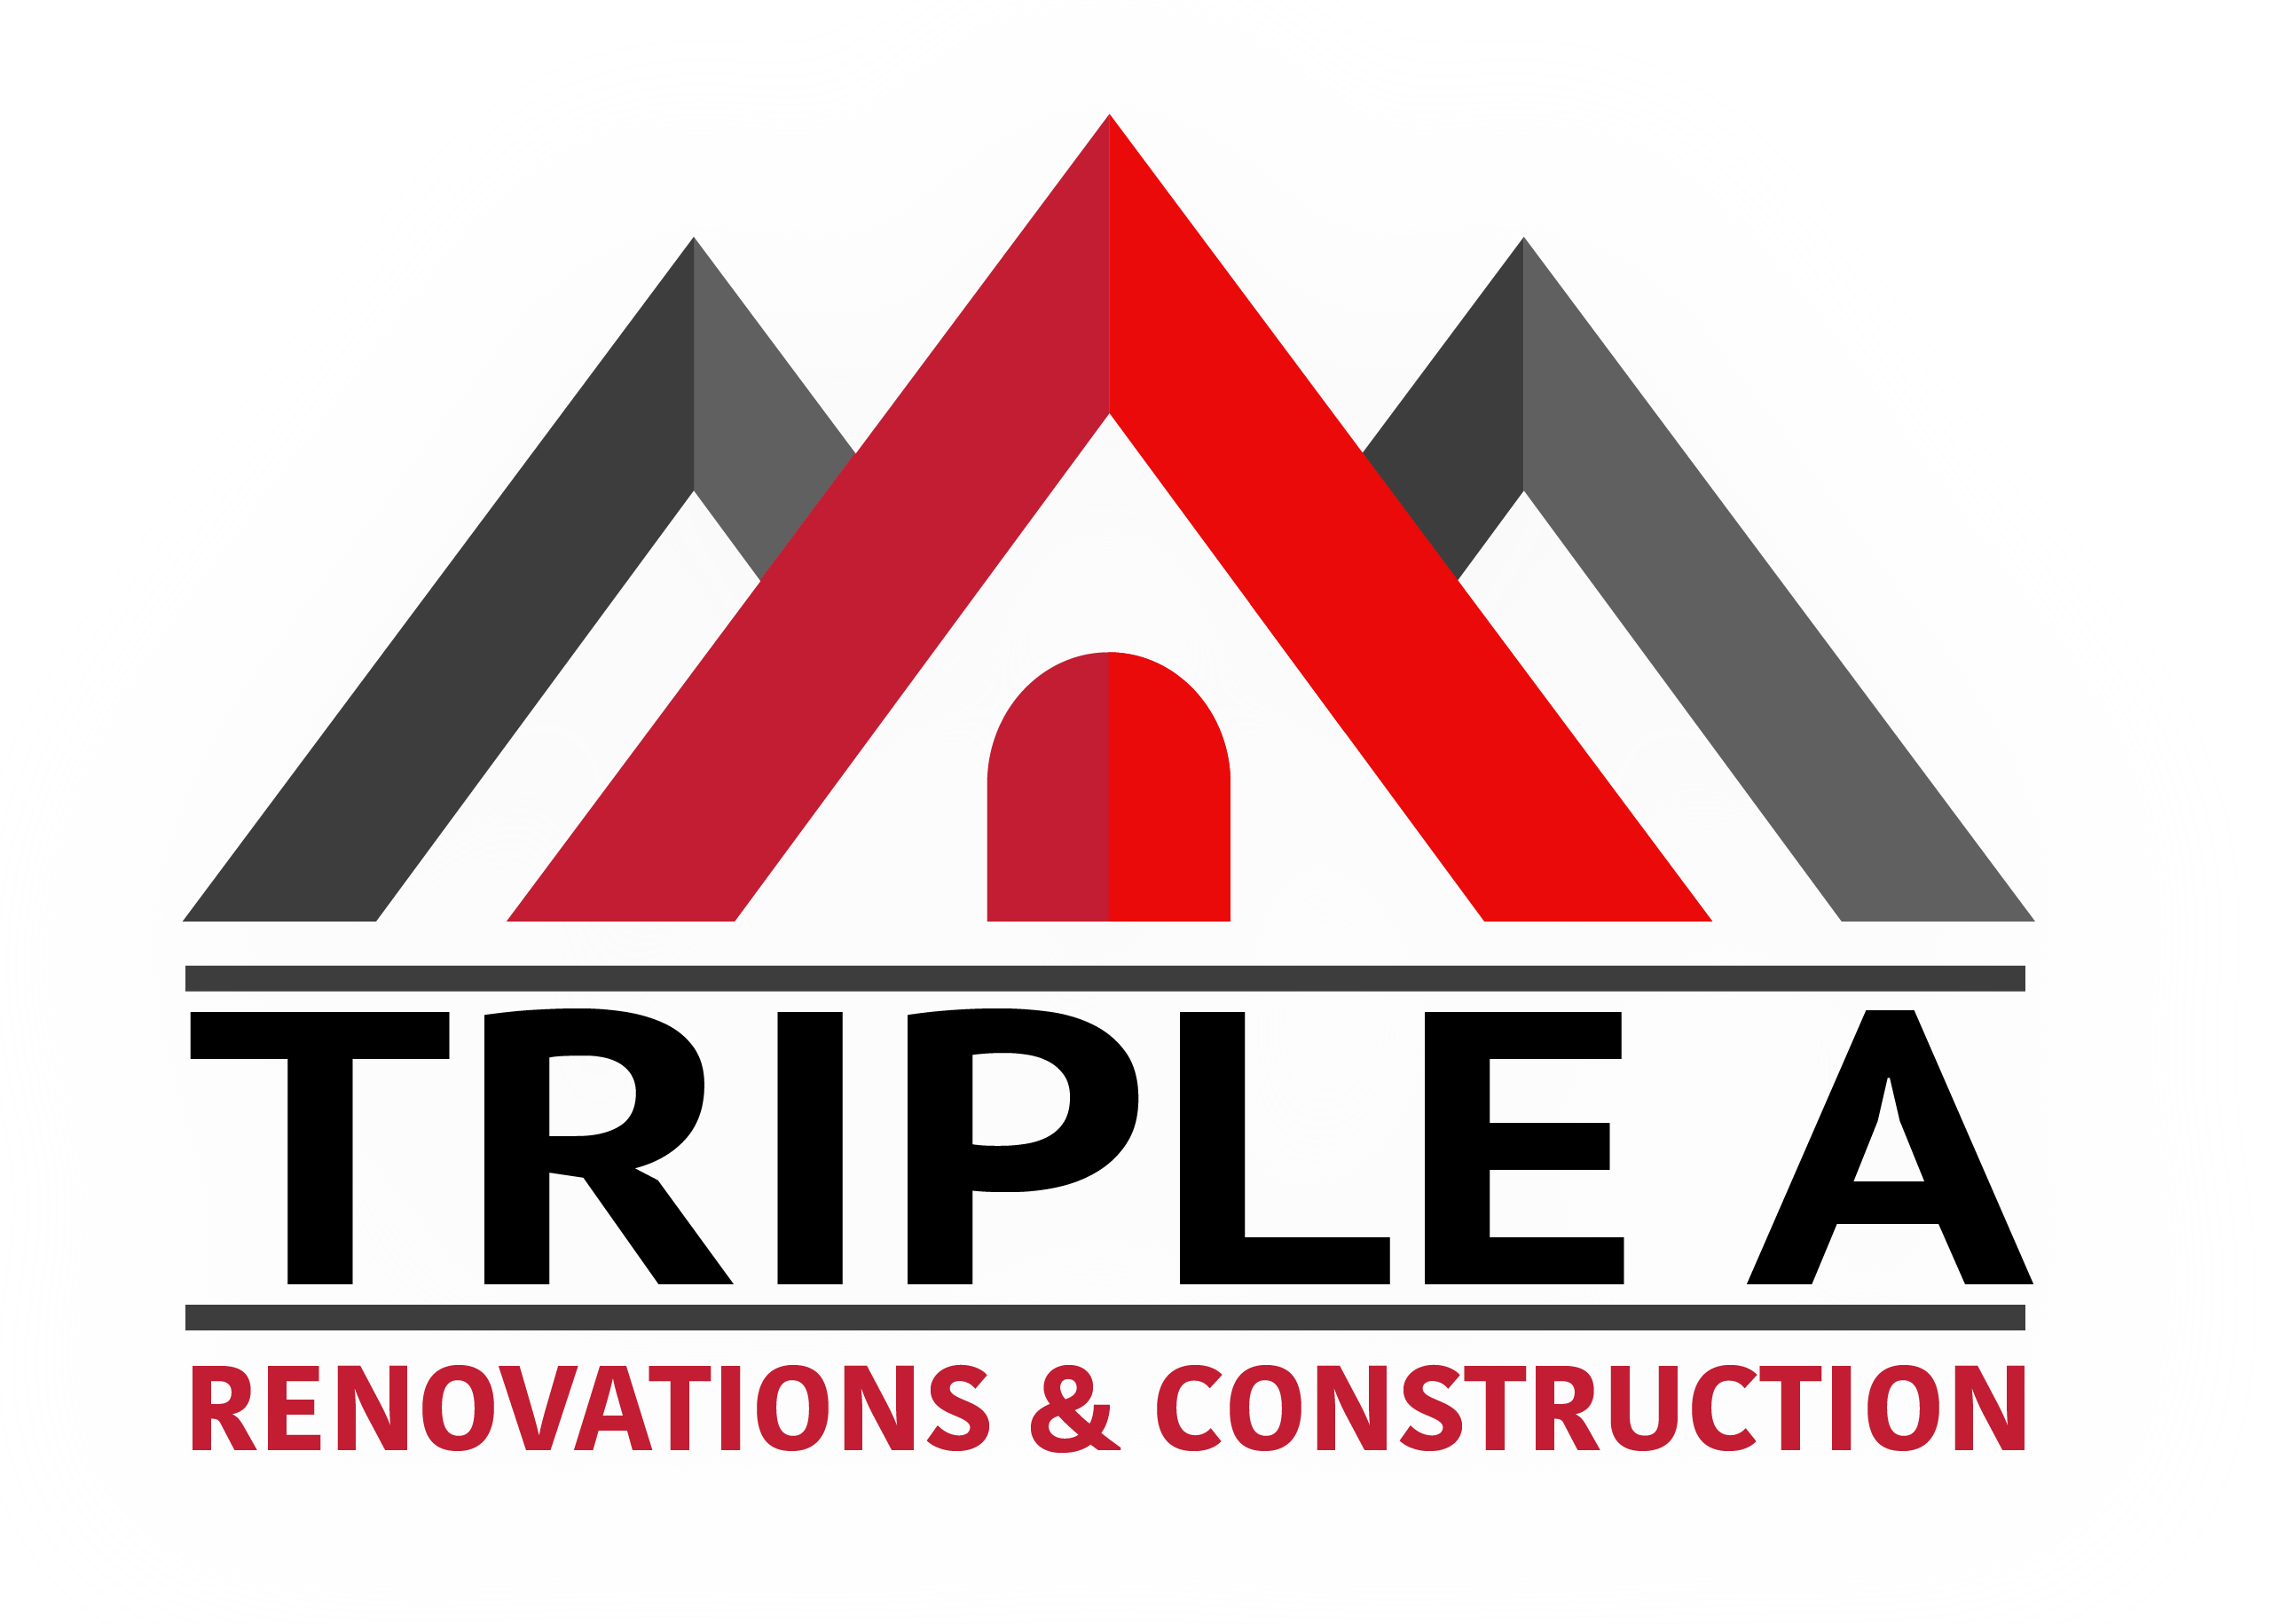 Triple A Renovations & Construction – Licensed and insured general contracting company